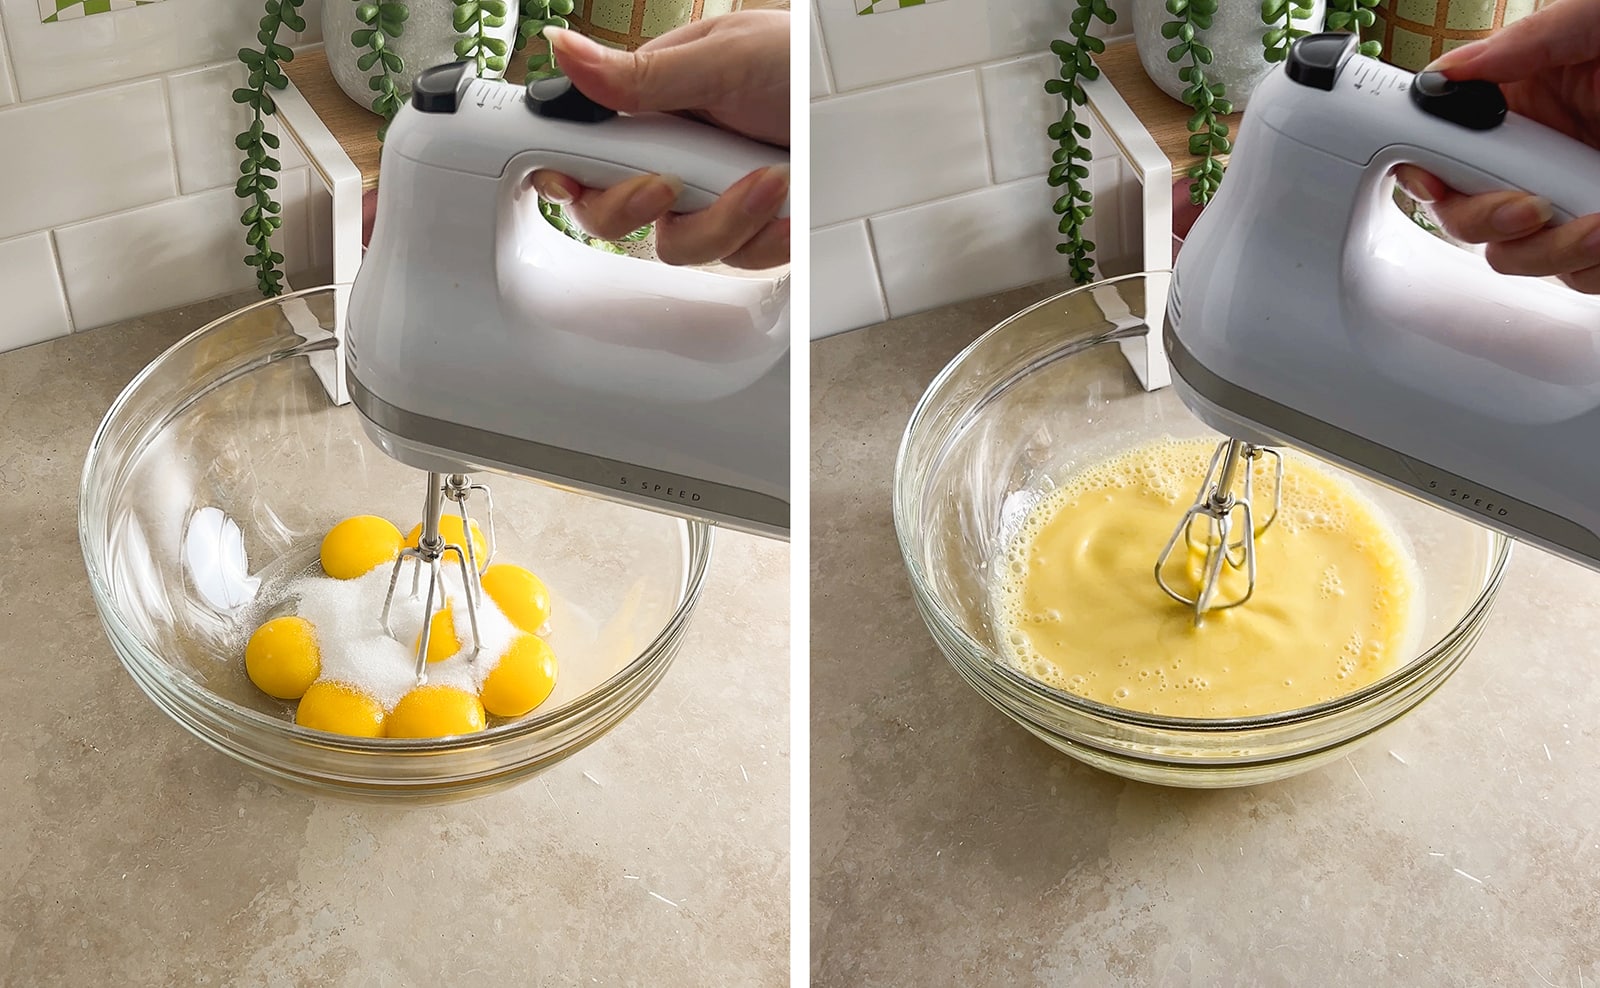 Left to right: egg yolks and sugar in a mixing bowl, mixing egg yolk mixture with a hand mixer.